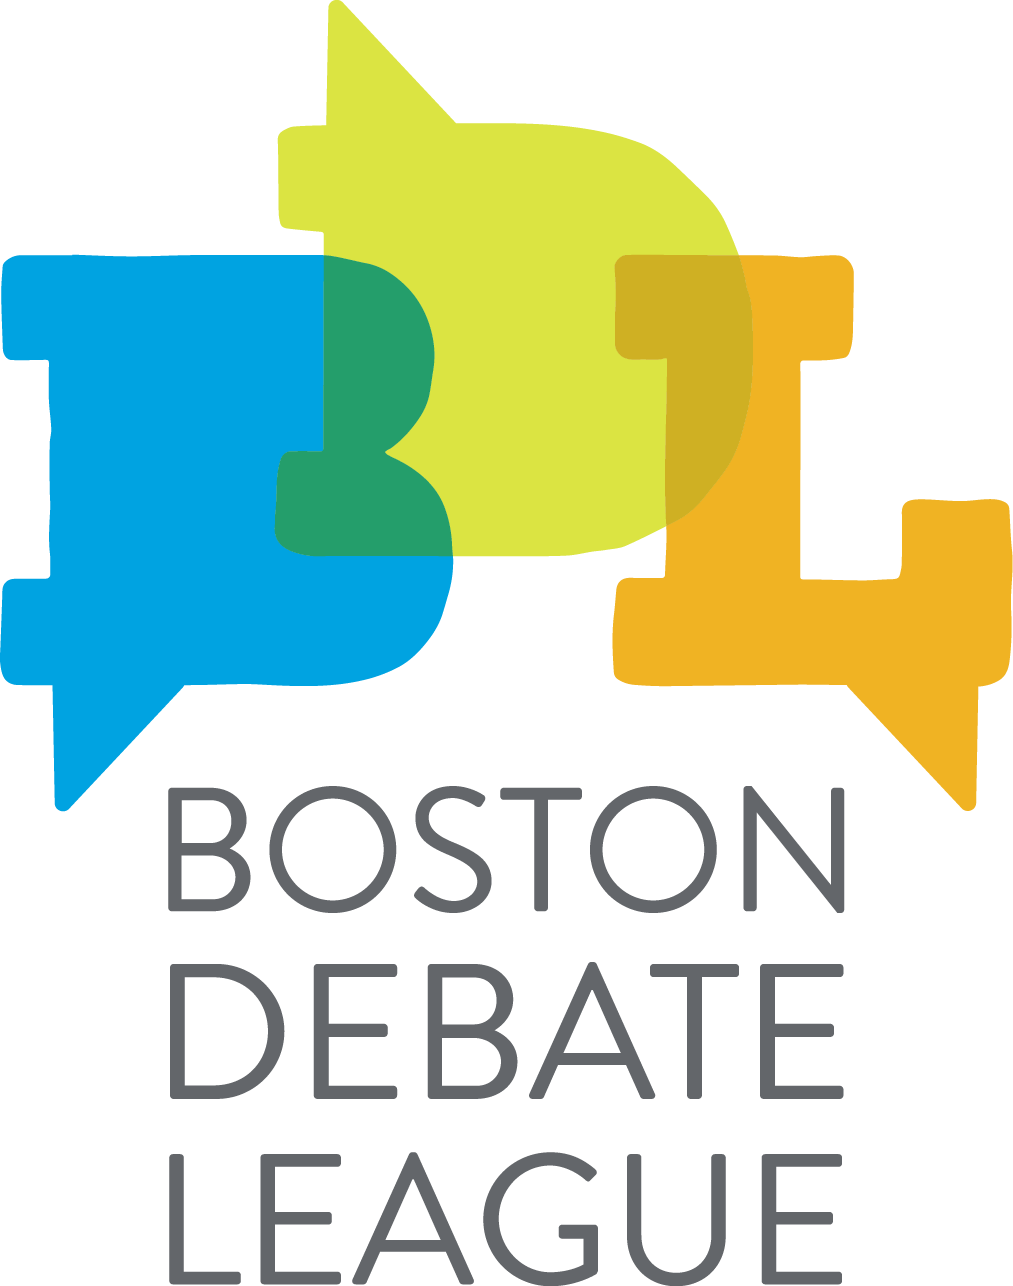 Evidence Based Argumentation Pd With Boston Debate - Evidence Based Argumentation Pd With Boston Debate (1013x1286)